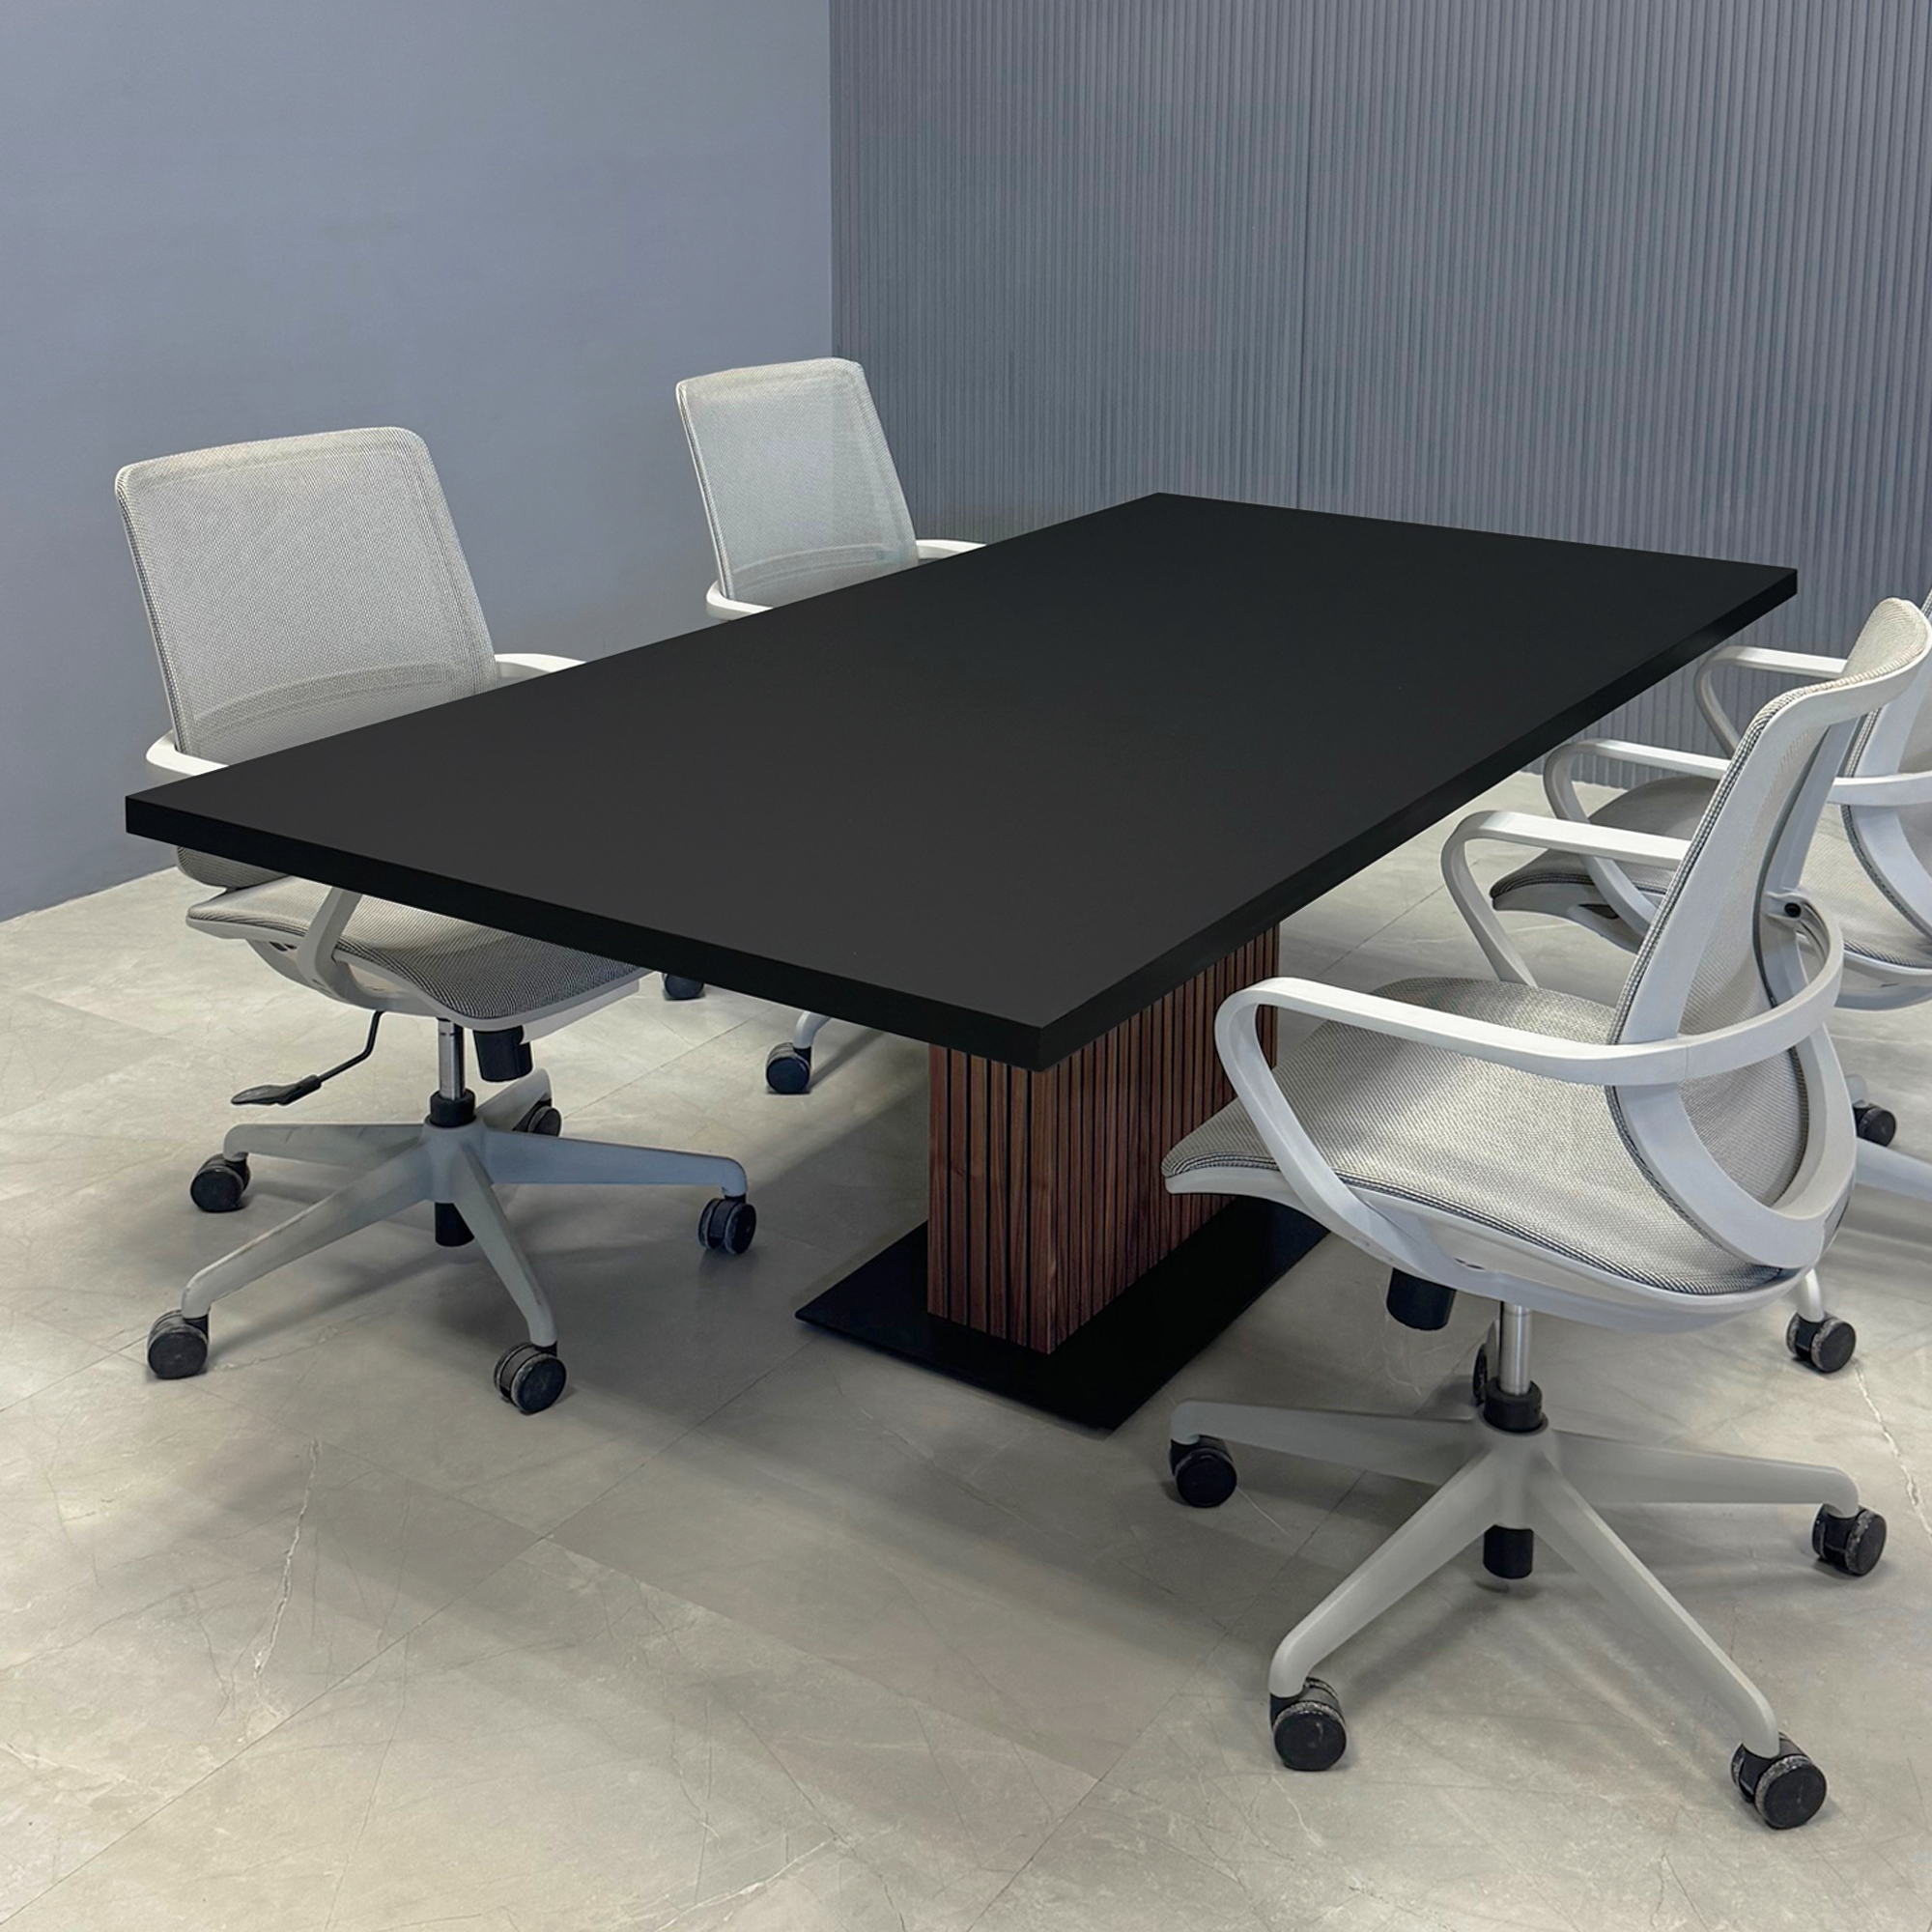 76-inch Newton Rectangular Conference Table in black traceless laminate top and black stainless steel base covered in walnut veneer tambour shown here.